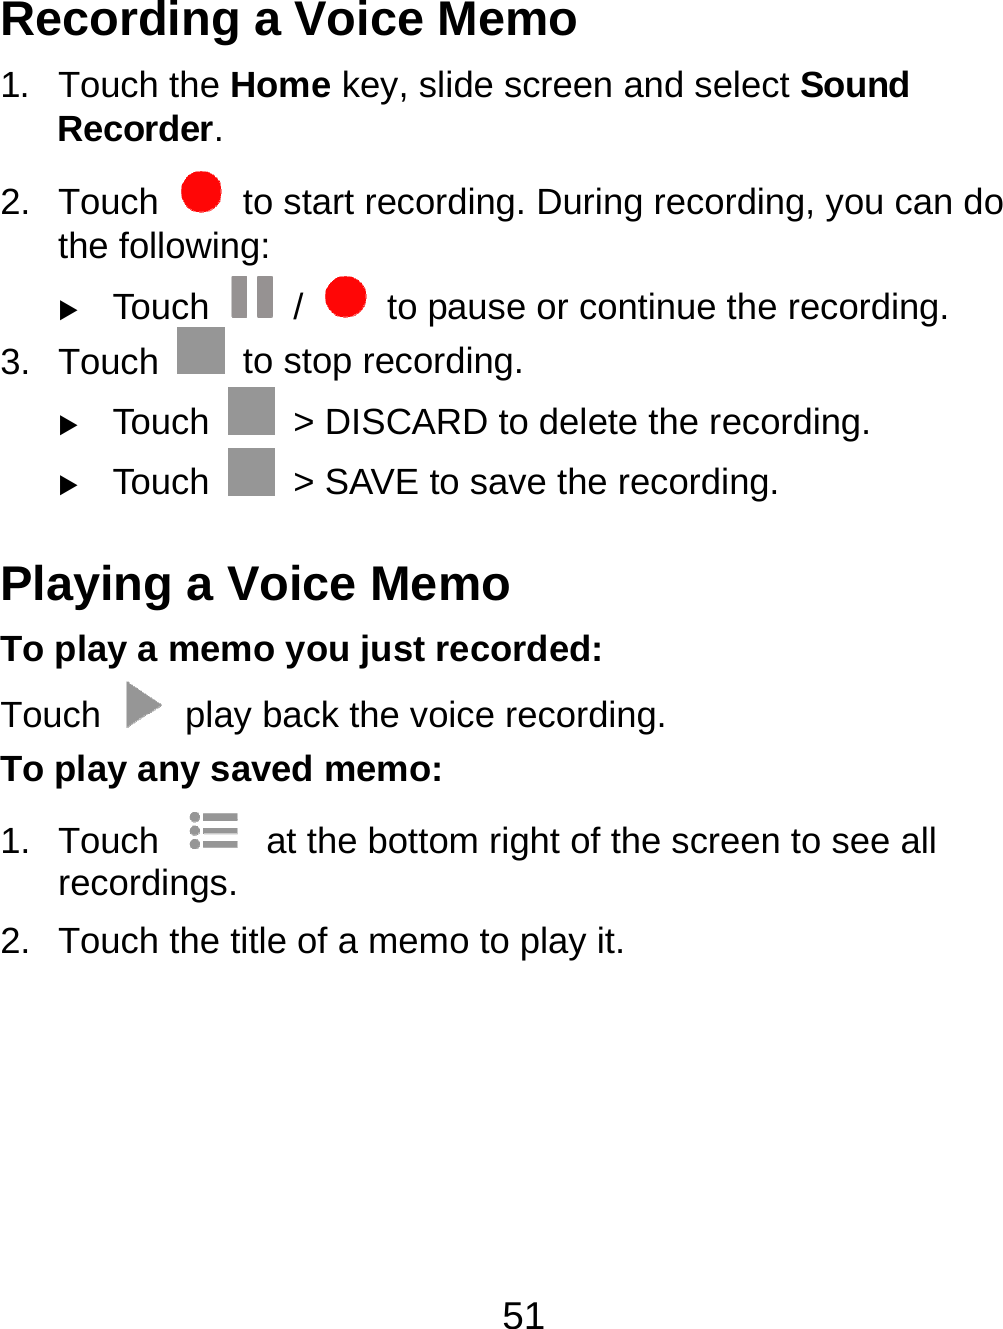 51 Recording a Voice Memo 1. Touch the Home key, slide screen and select Sound Recorder. 2. Touch    to start recording. During recording, you can do the following:  Touch   /    to pause or continue the recording. 3. Touch    to stop recording.    Touch    &gt; DISCARD to delete the recording.  Touch    &gt; SAVE to save the recording. Playing a Voice Memo To play a memo you just recorded: Touch    play back the voice recording. To play any saved memo: 1. Touch    at the bottom right of the screen to see all recordings. 2.  Touch the title of a memo to play it. 